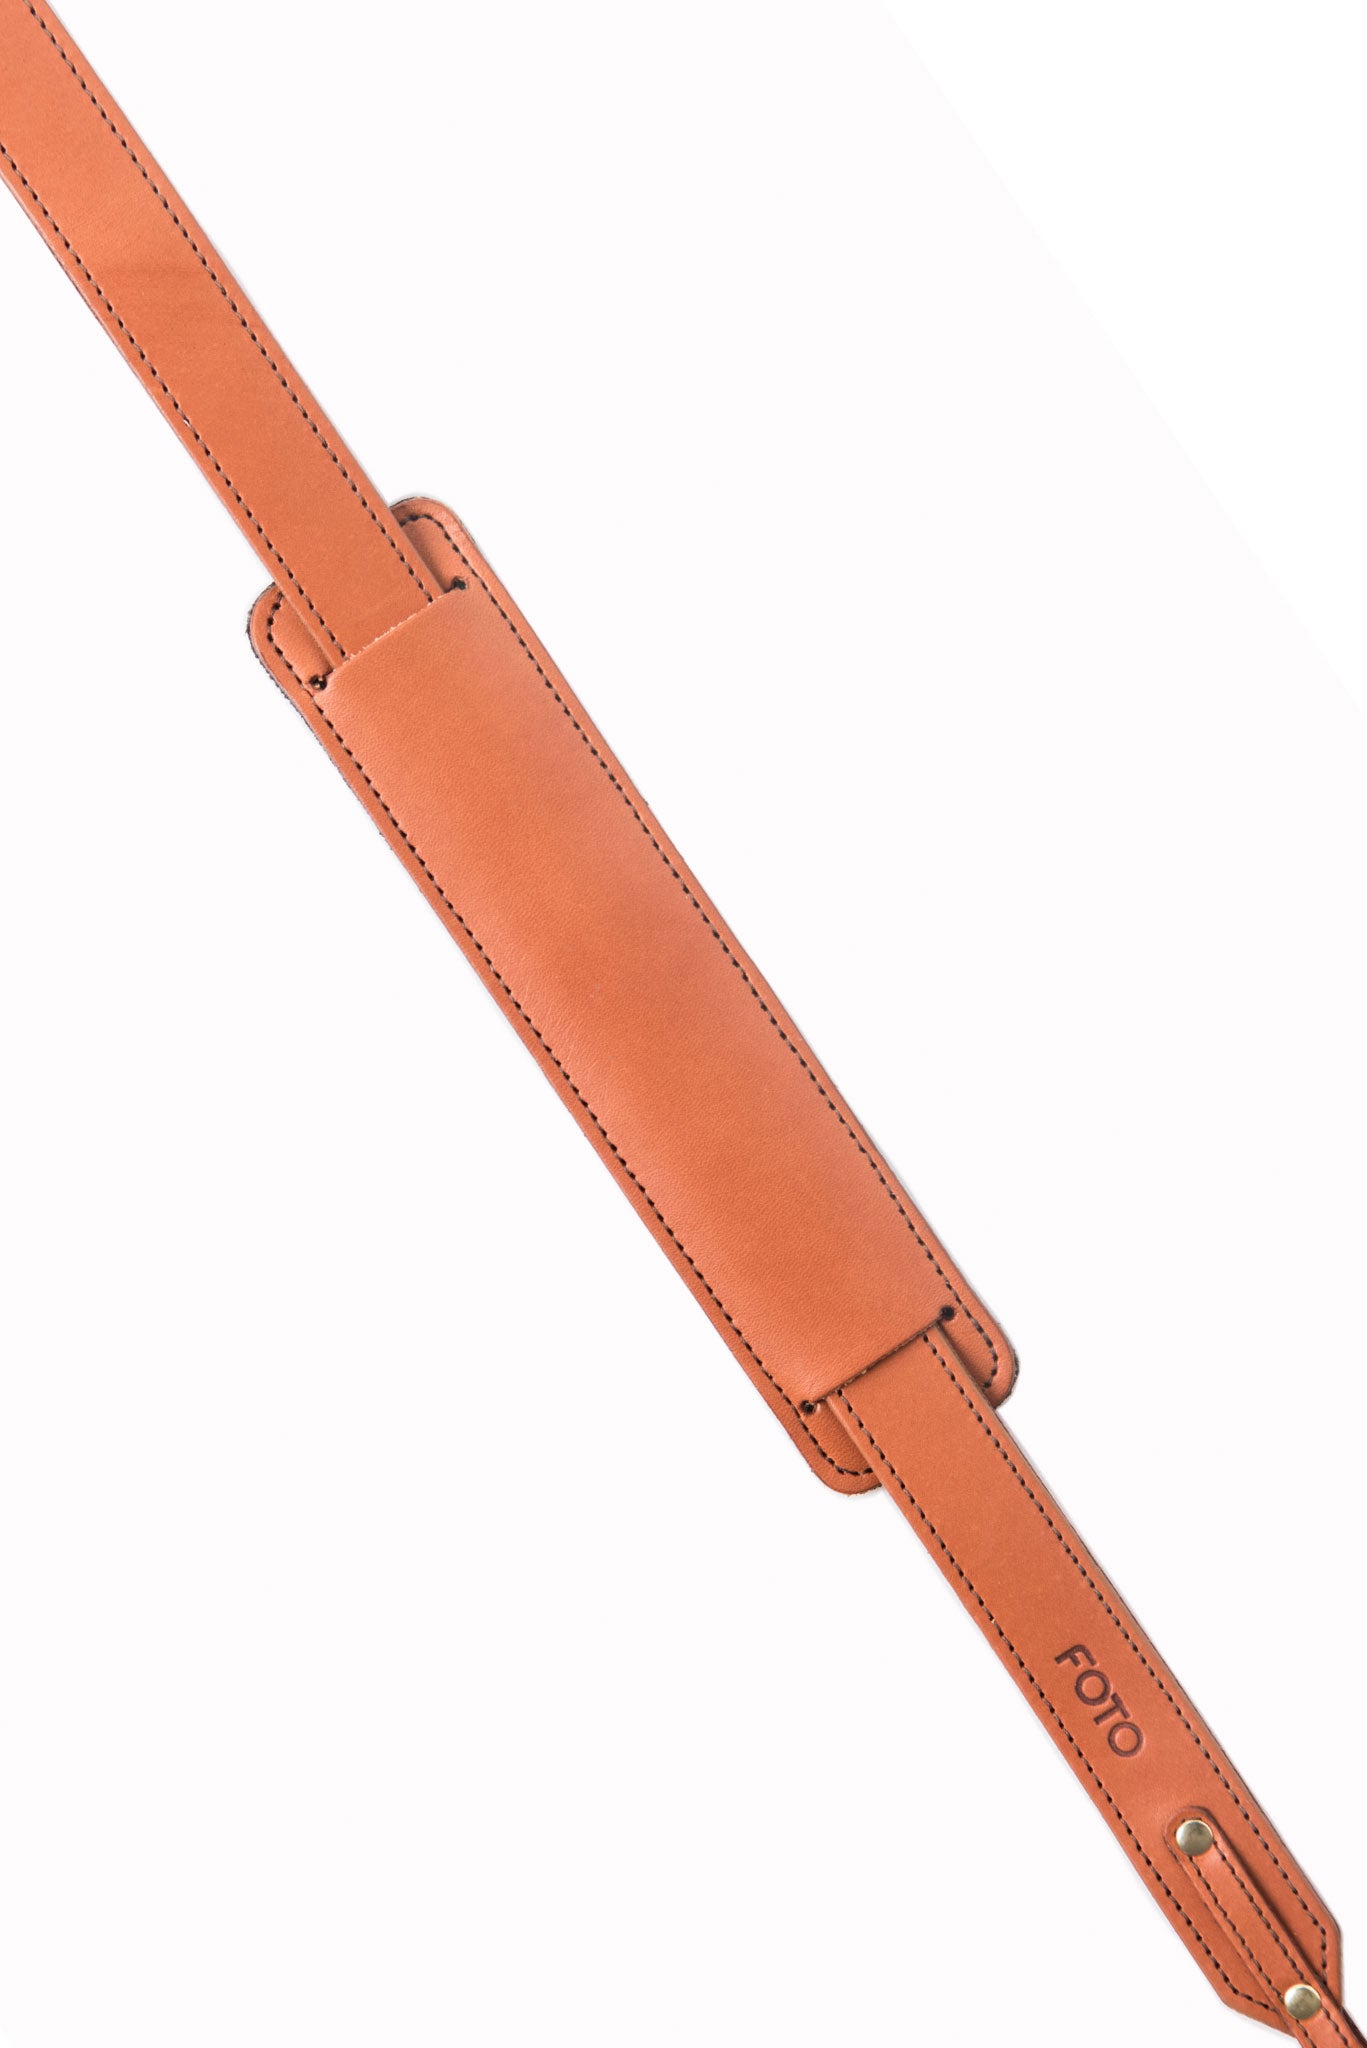 FOTO | The Skinny Cognac - a cognac brown genuine all-leather skinny camera strap that can be personalized with a monogram or business logo, making this leather camera strap the perfect personalized gift.